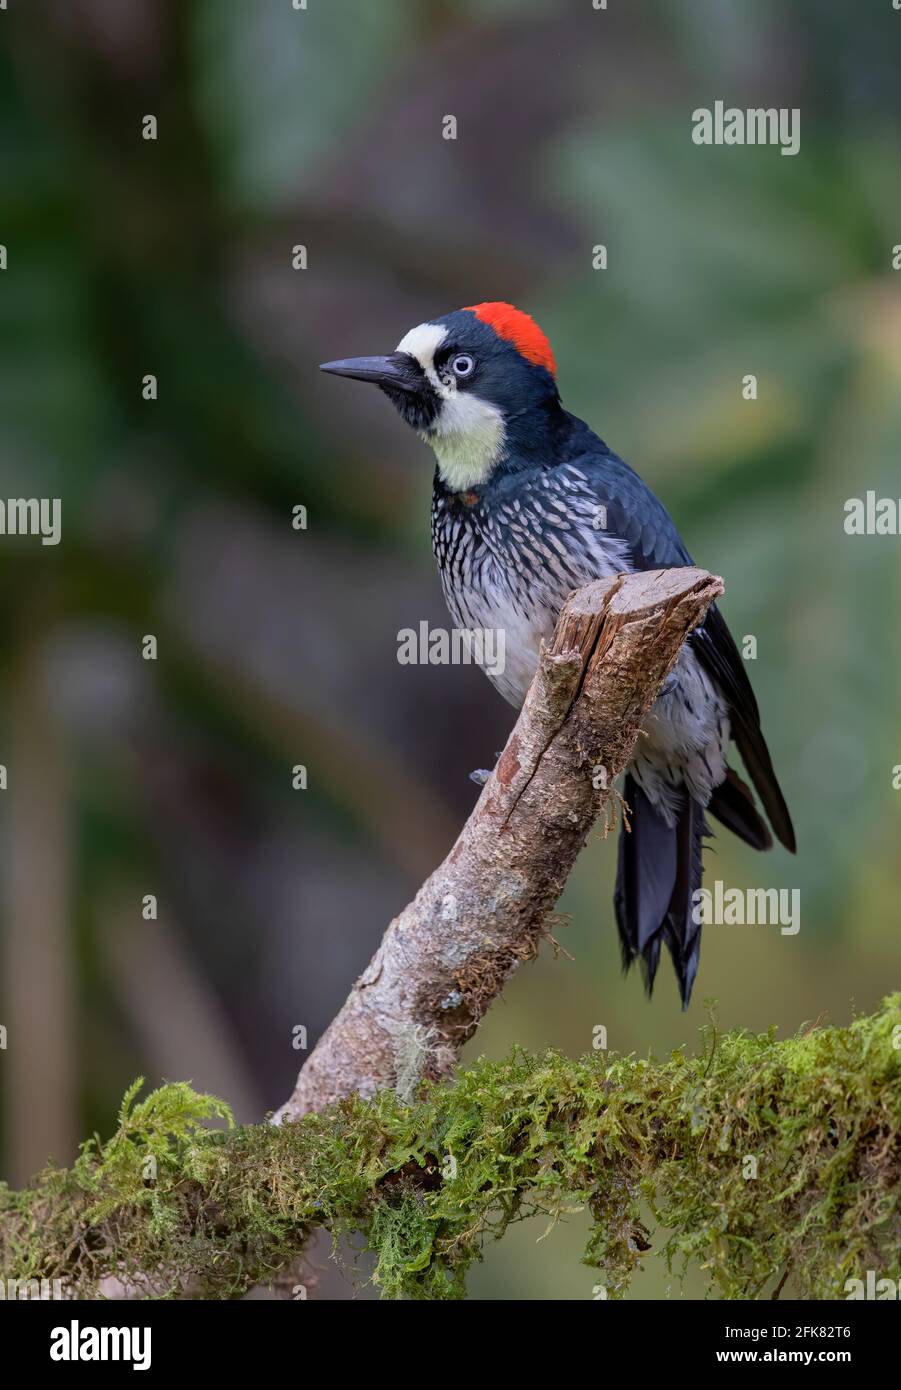 Acorn woodpecker (Melanerpes formicivorus) perched on a branch in the jungles of Costa Rica. Stock Photo